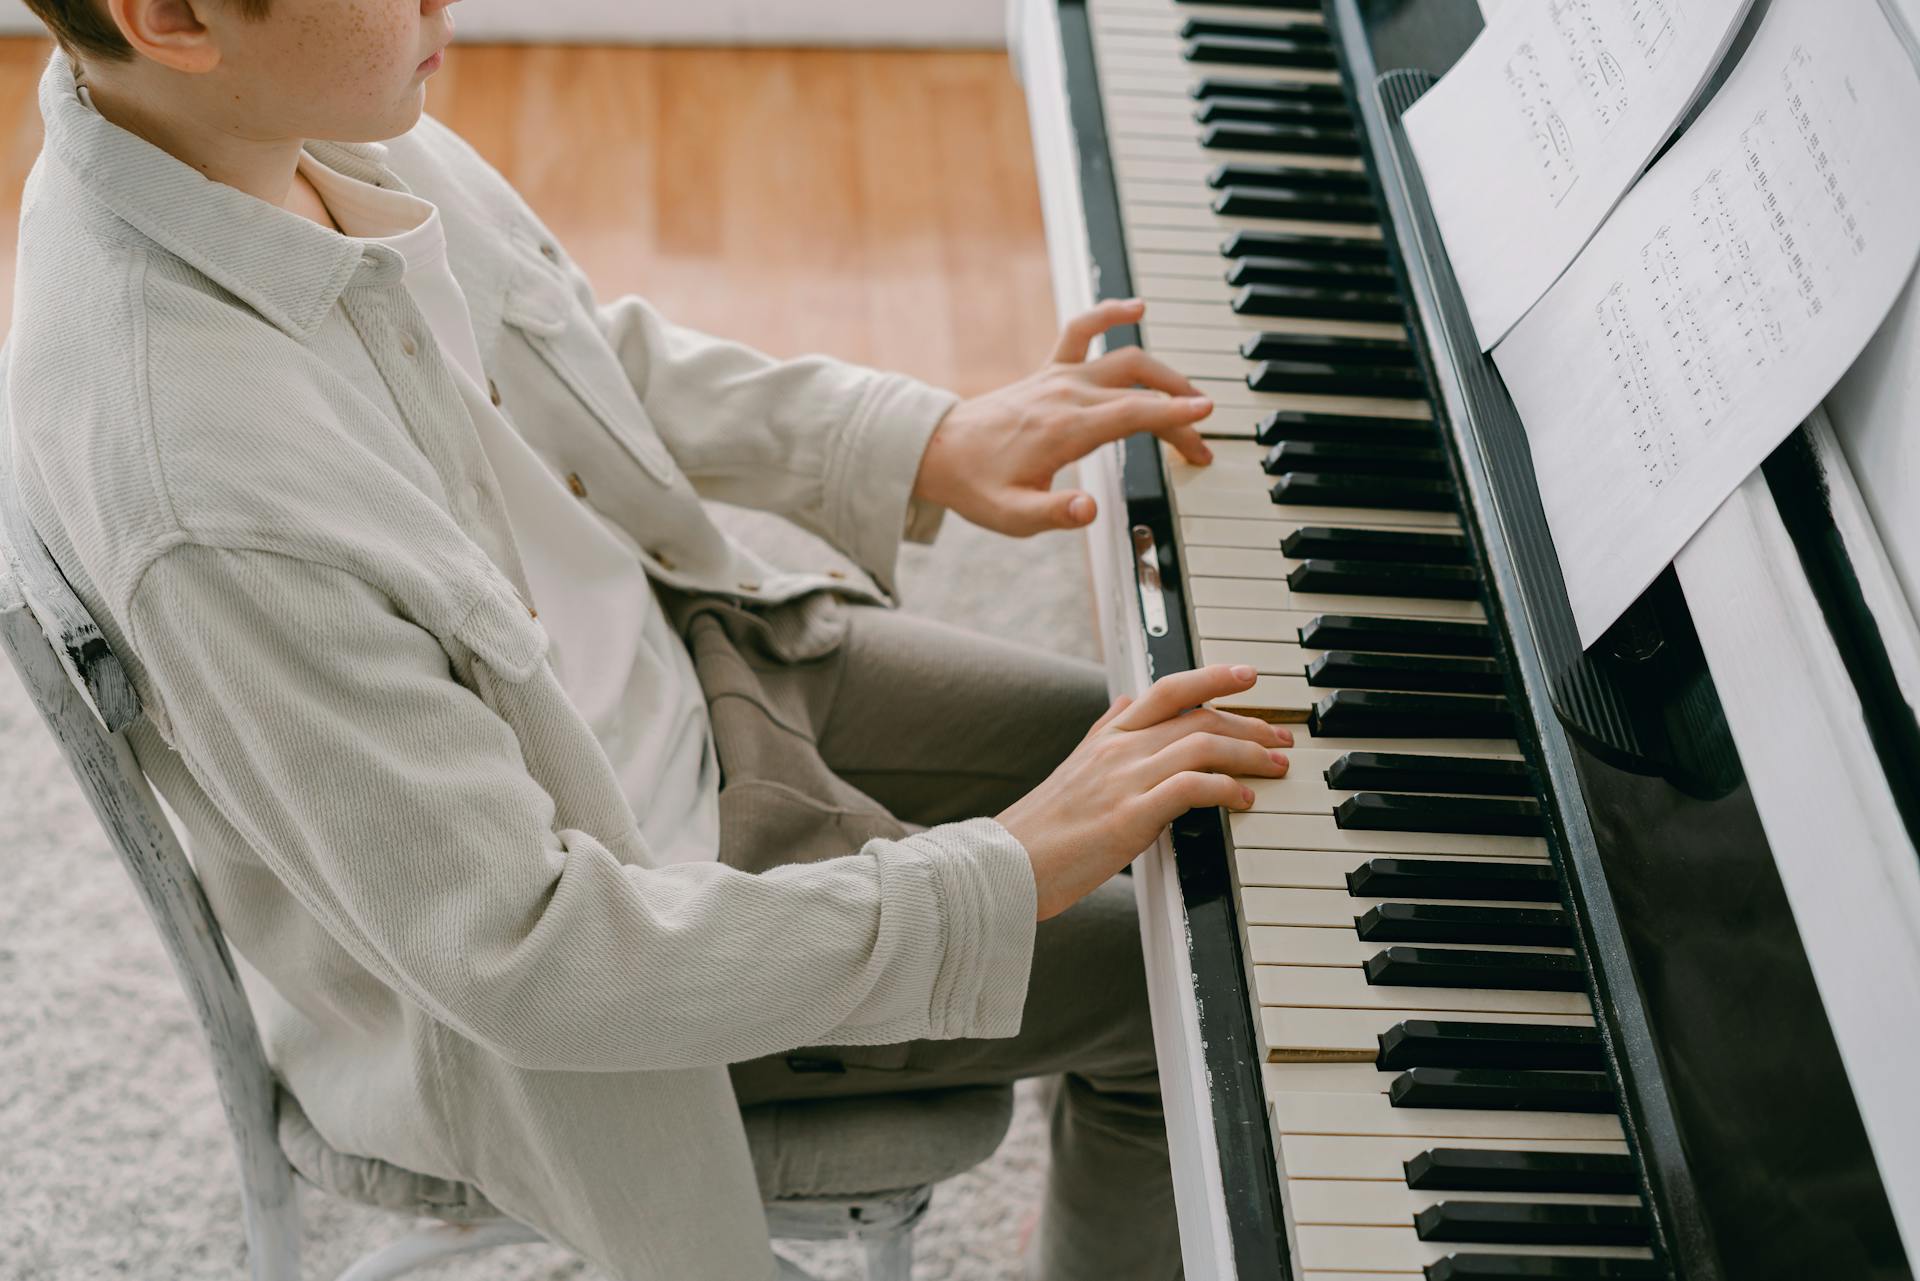 Master the Art of Piano with Utah Piano Lessons at Volz Piano